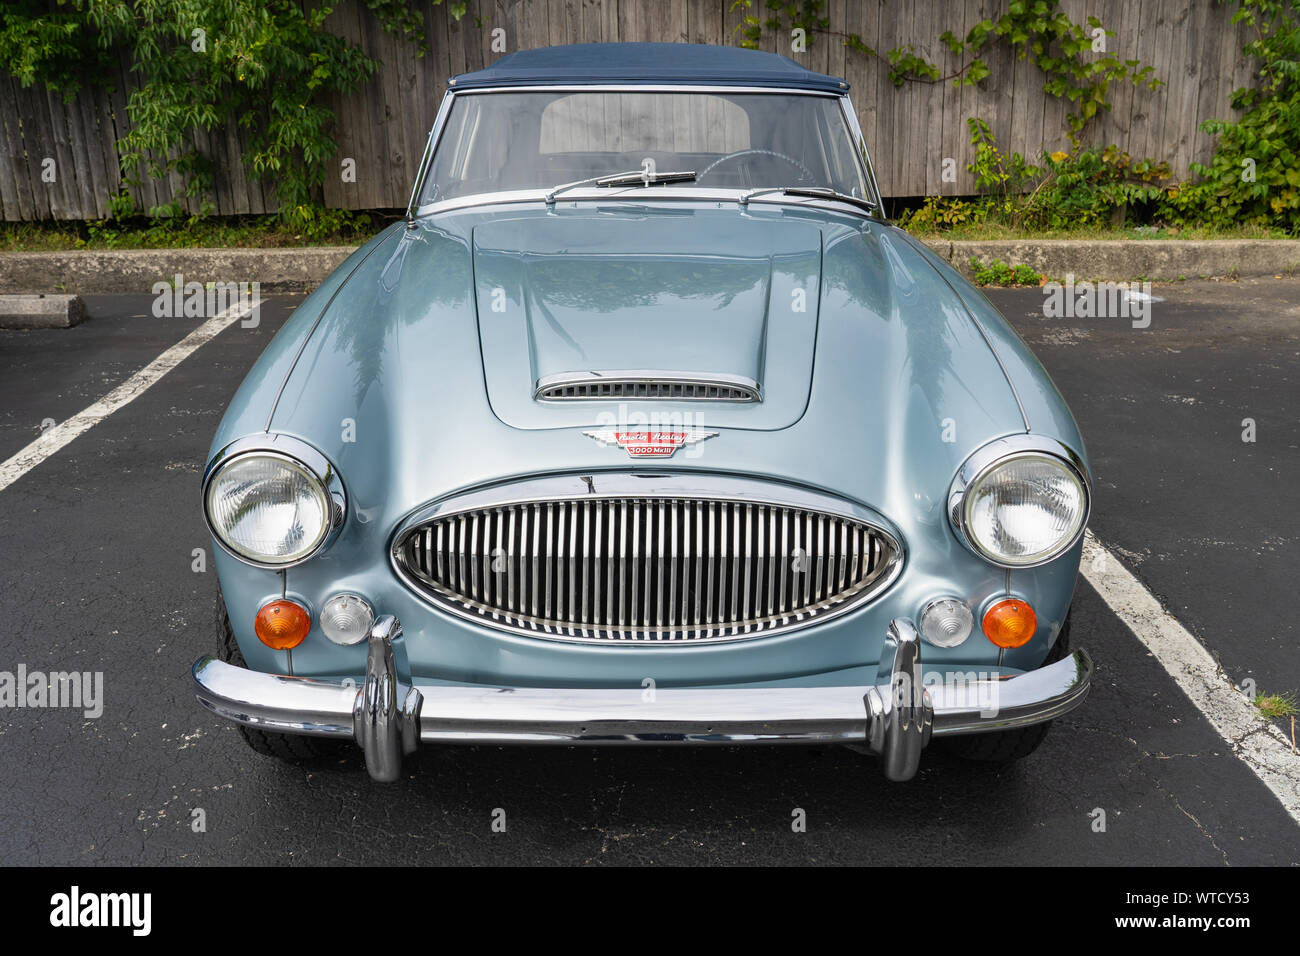 Conshohocken, PA - September 1, 2019: This beautiful blue Austin Healey 3000 Mark III seen parked in a parking lot is a 1960s British sports car. Stock Photo